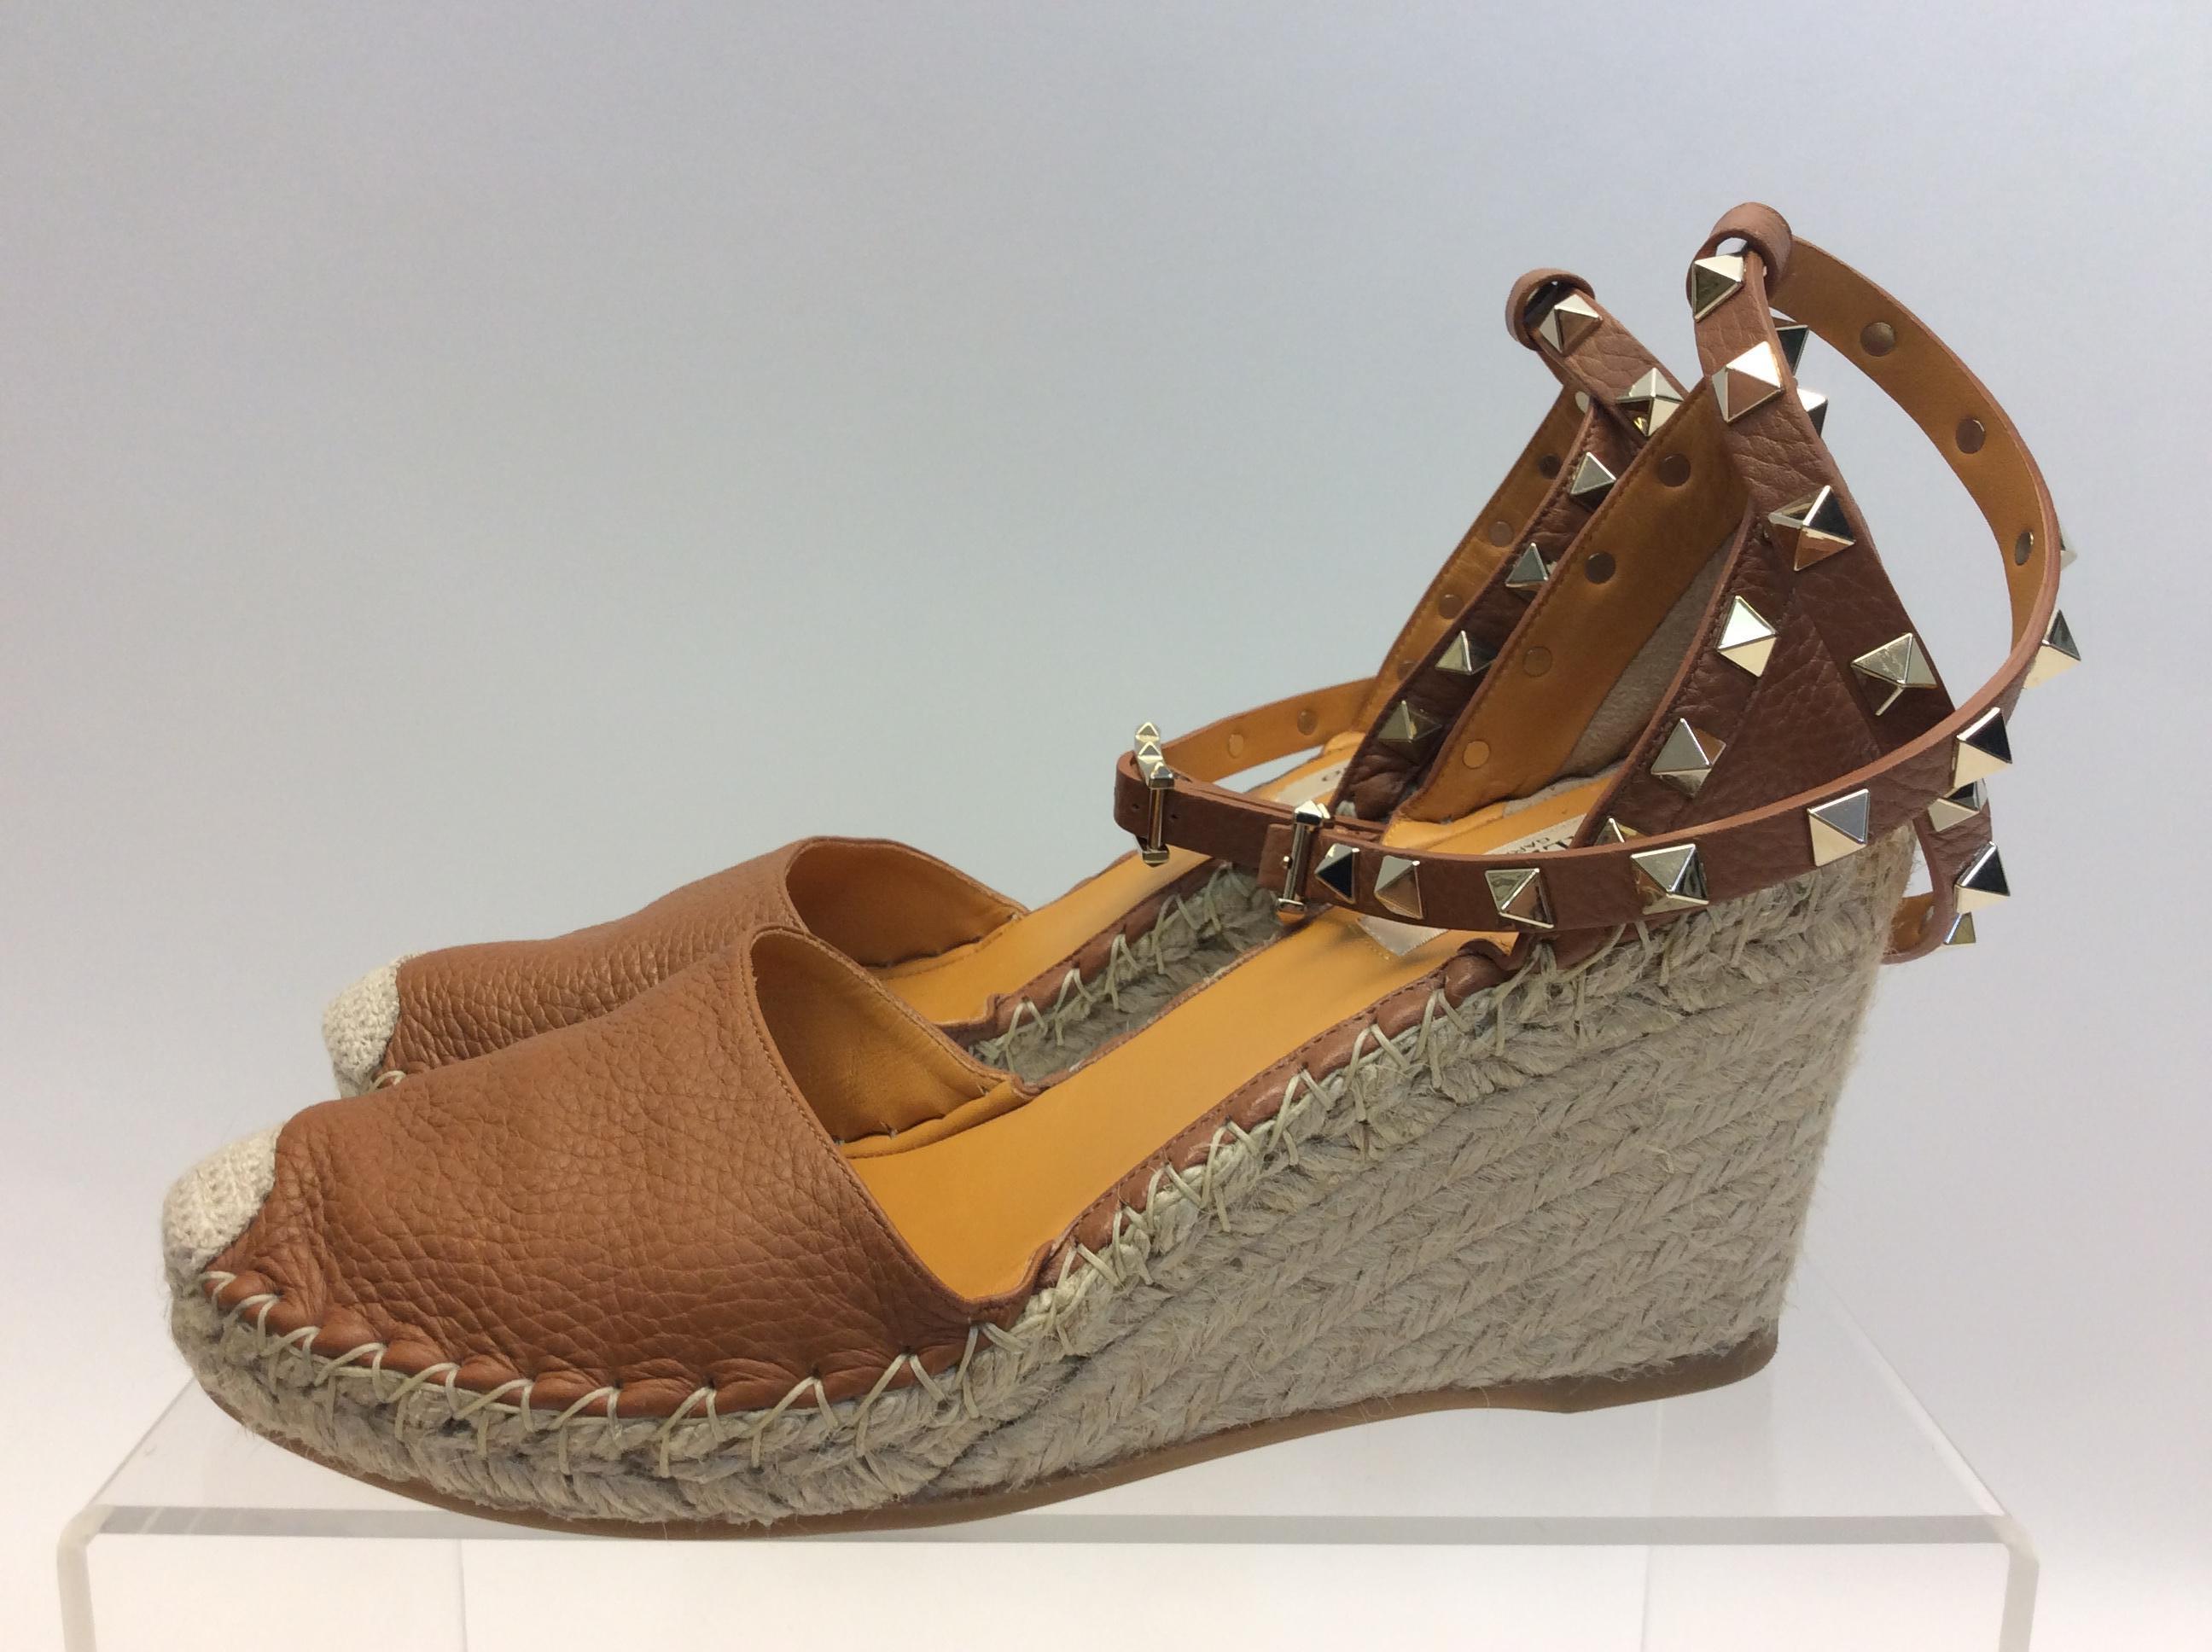 Valentino Tan Rockstud Espadrille Wedges
$450
Made in Italy
Leather
Size 38
3.5” heel
.5” platform
